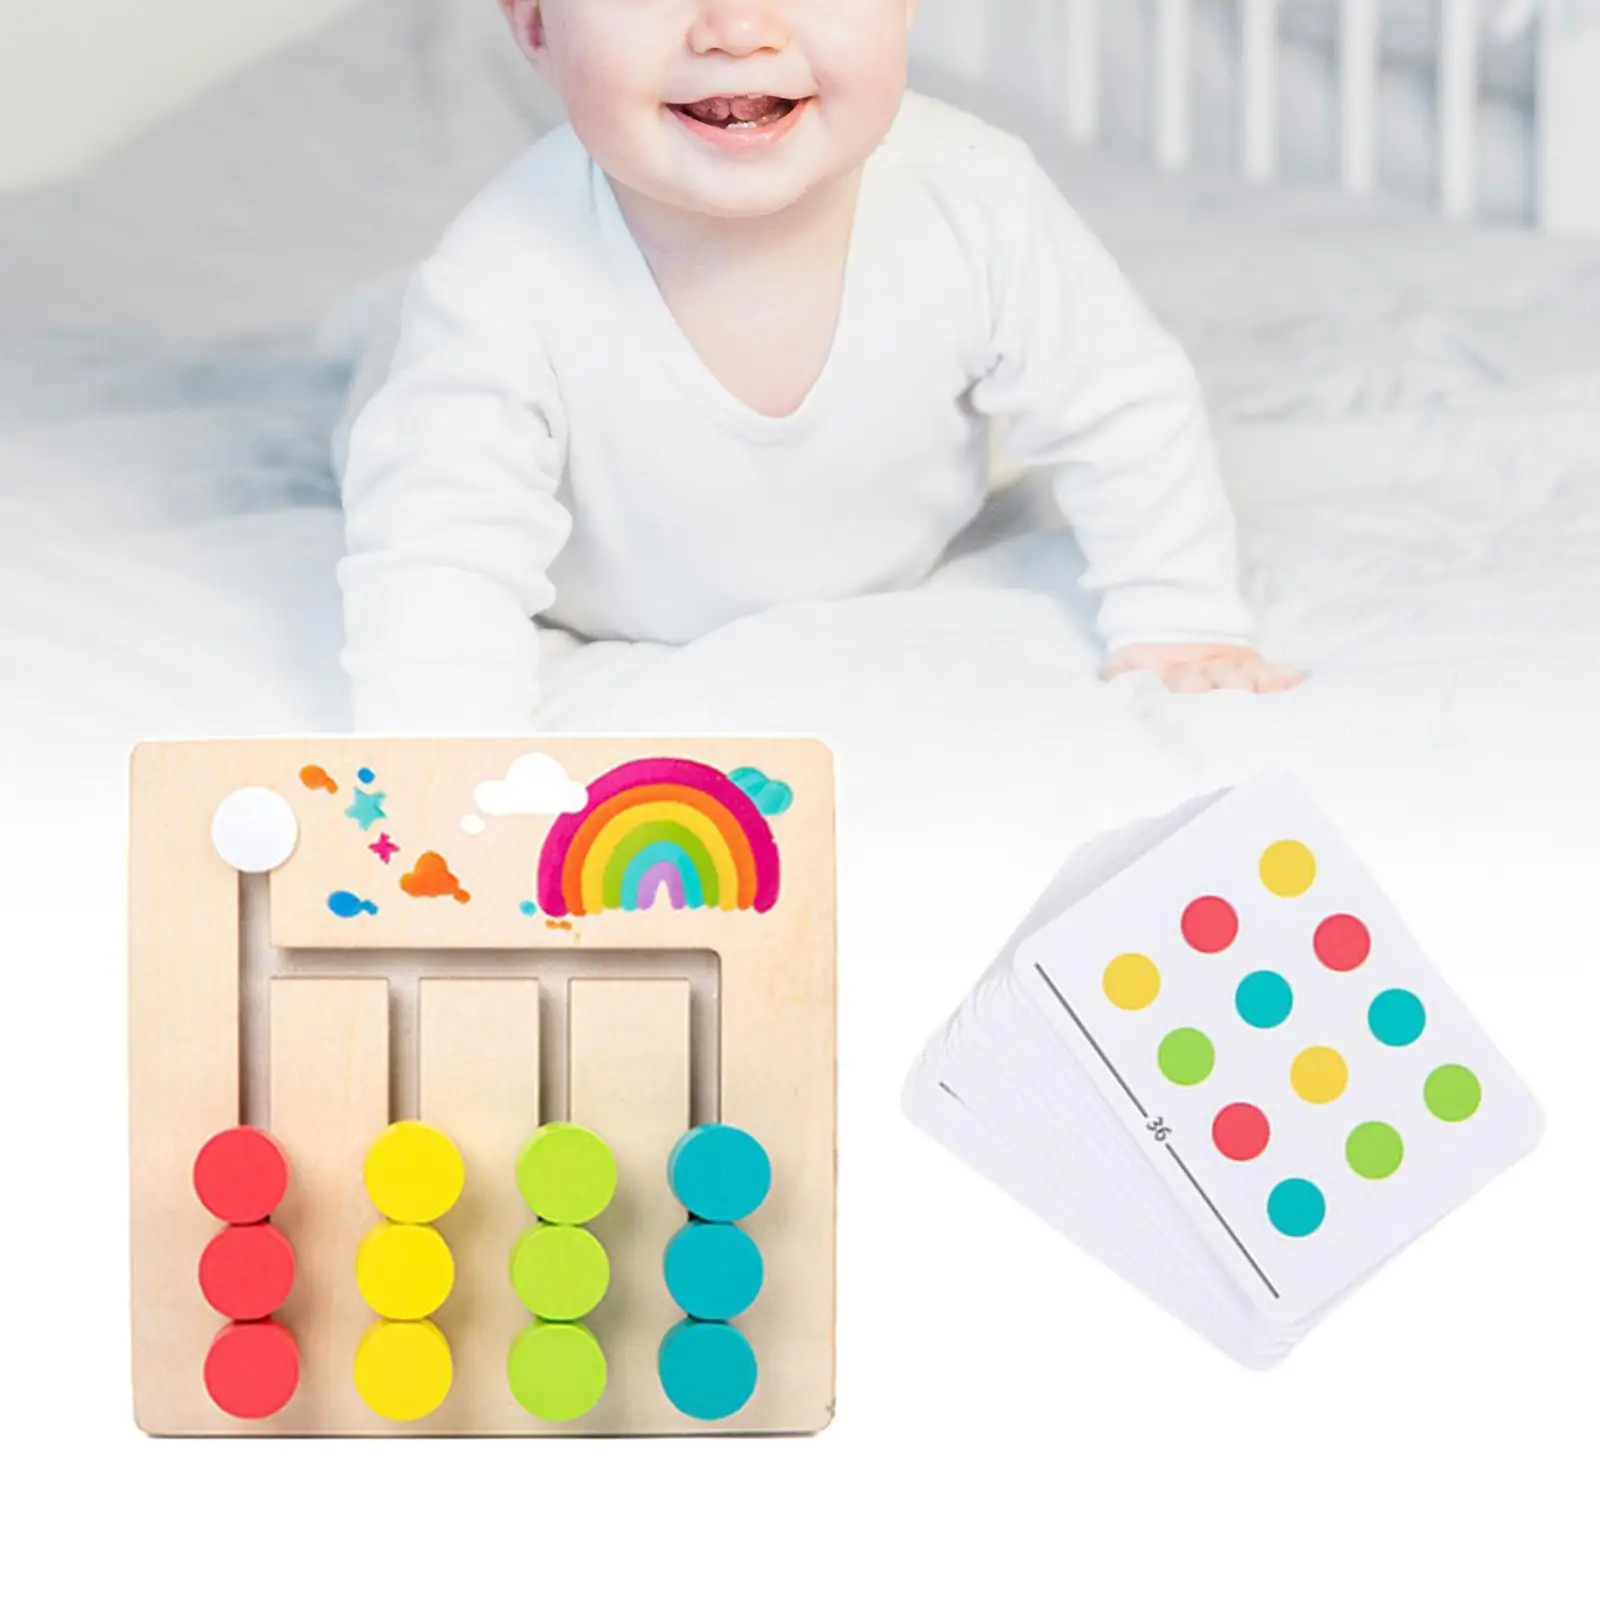 Montessori Toys Slide Puzzle Board Games Preschool Educational Toys Color and Shape Matching Brain Teasers Logic Game for Child